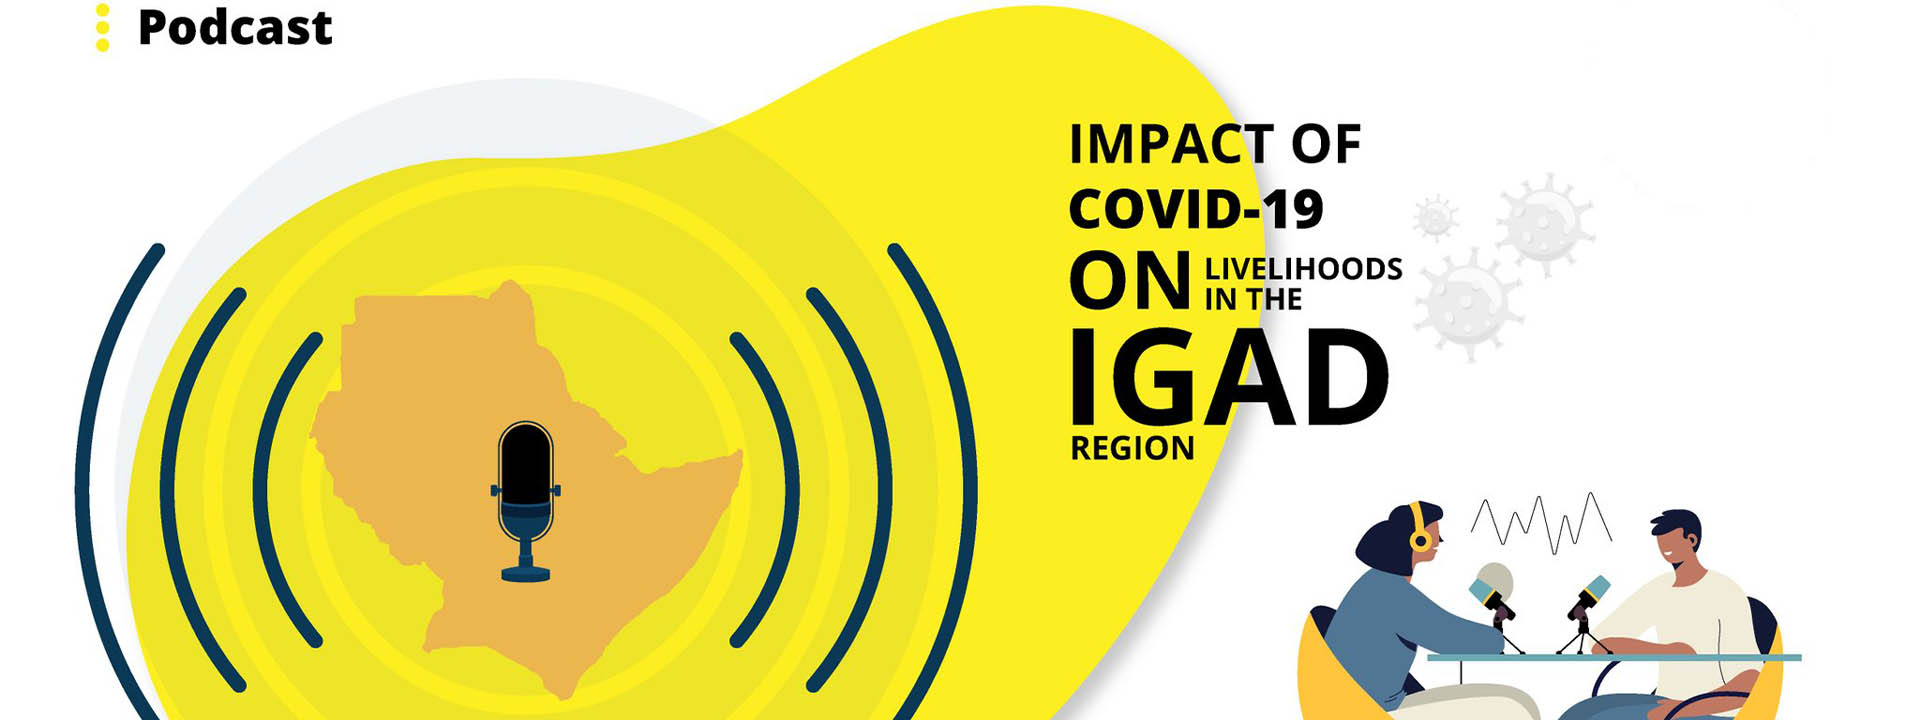 The Impact of COVID-19 on the Education Systems in the IGAD Region